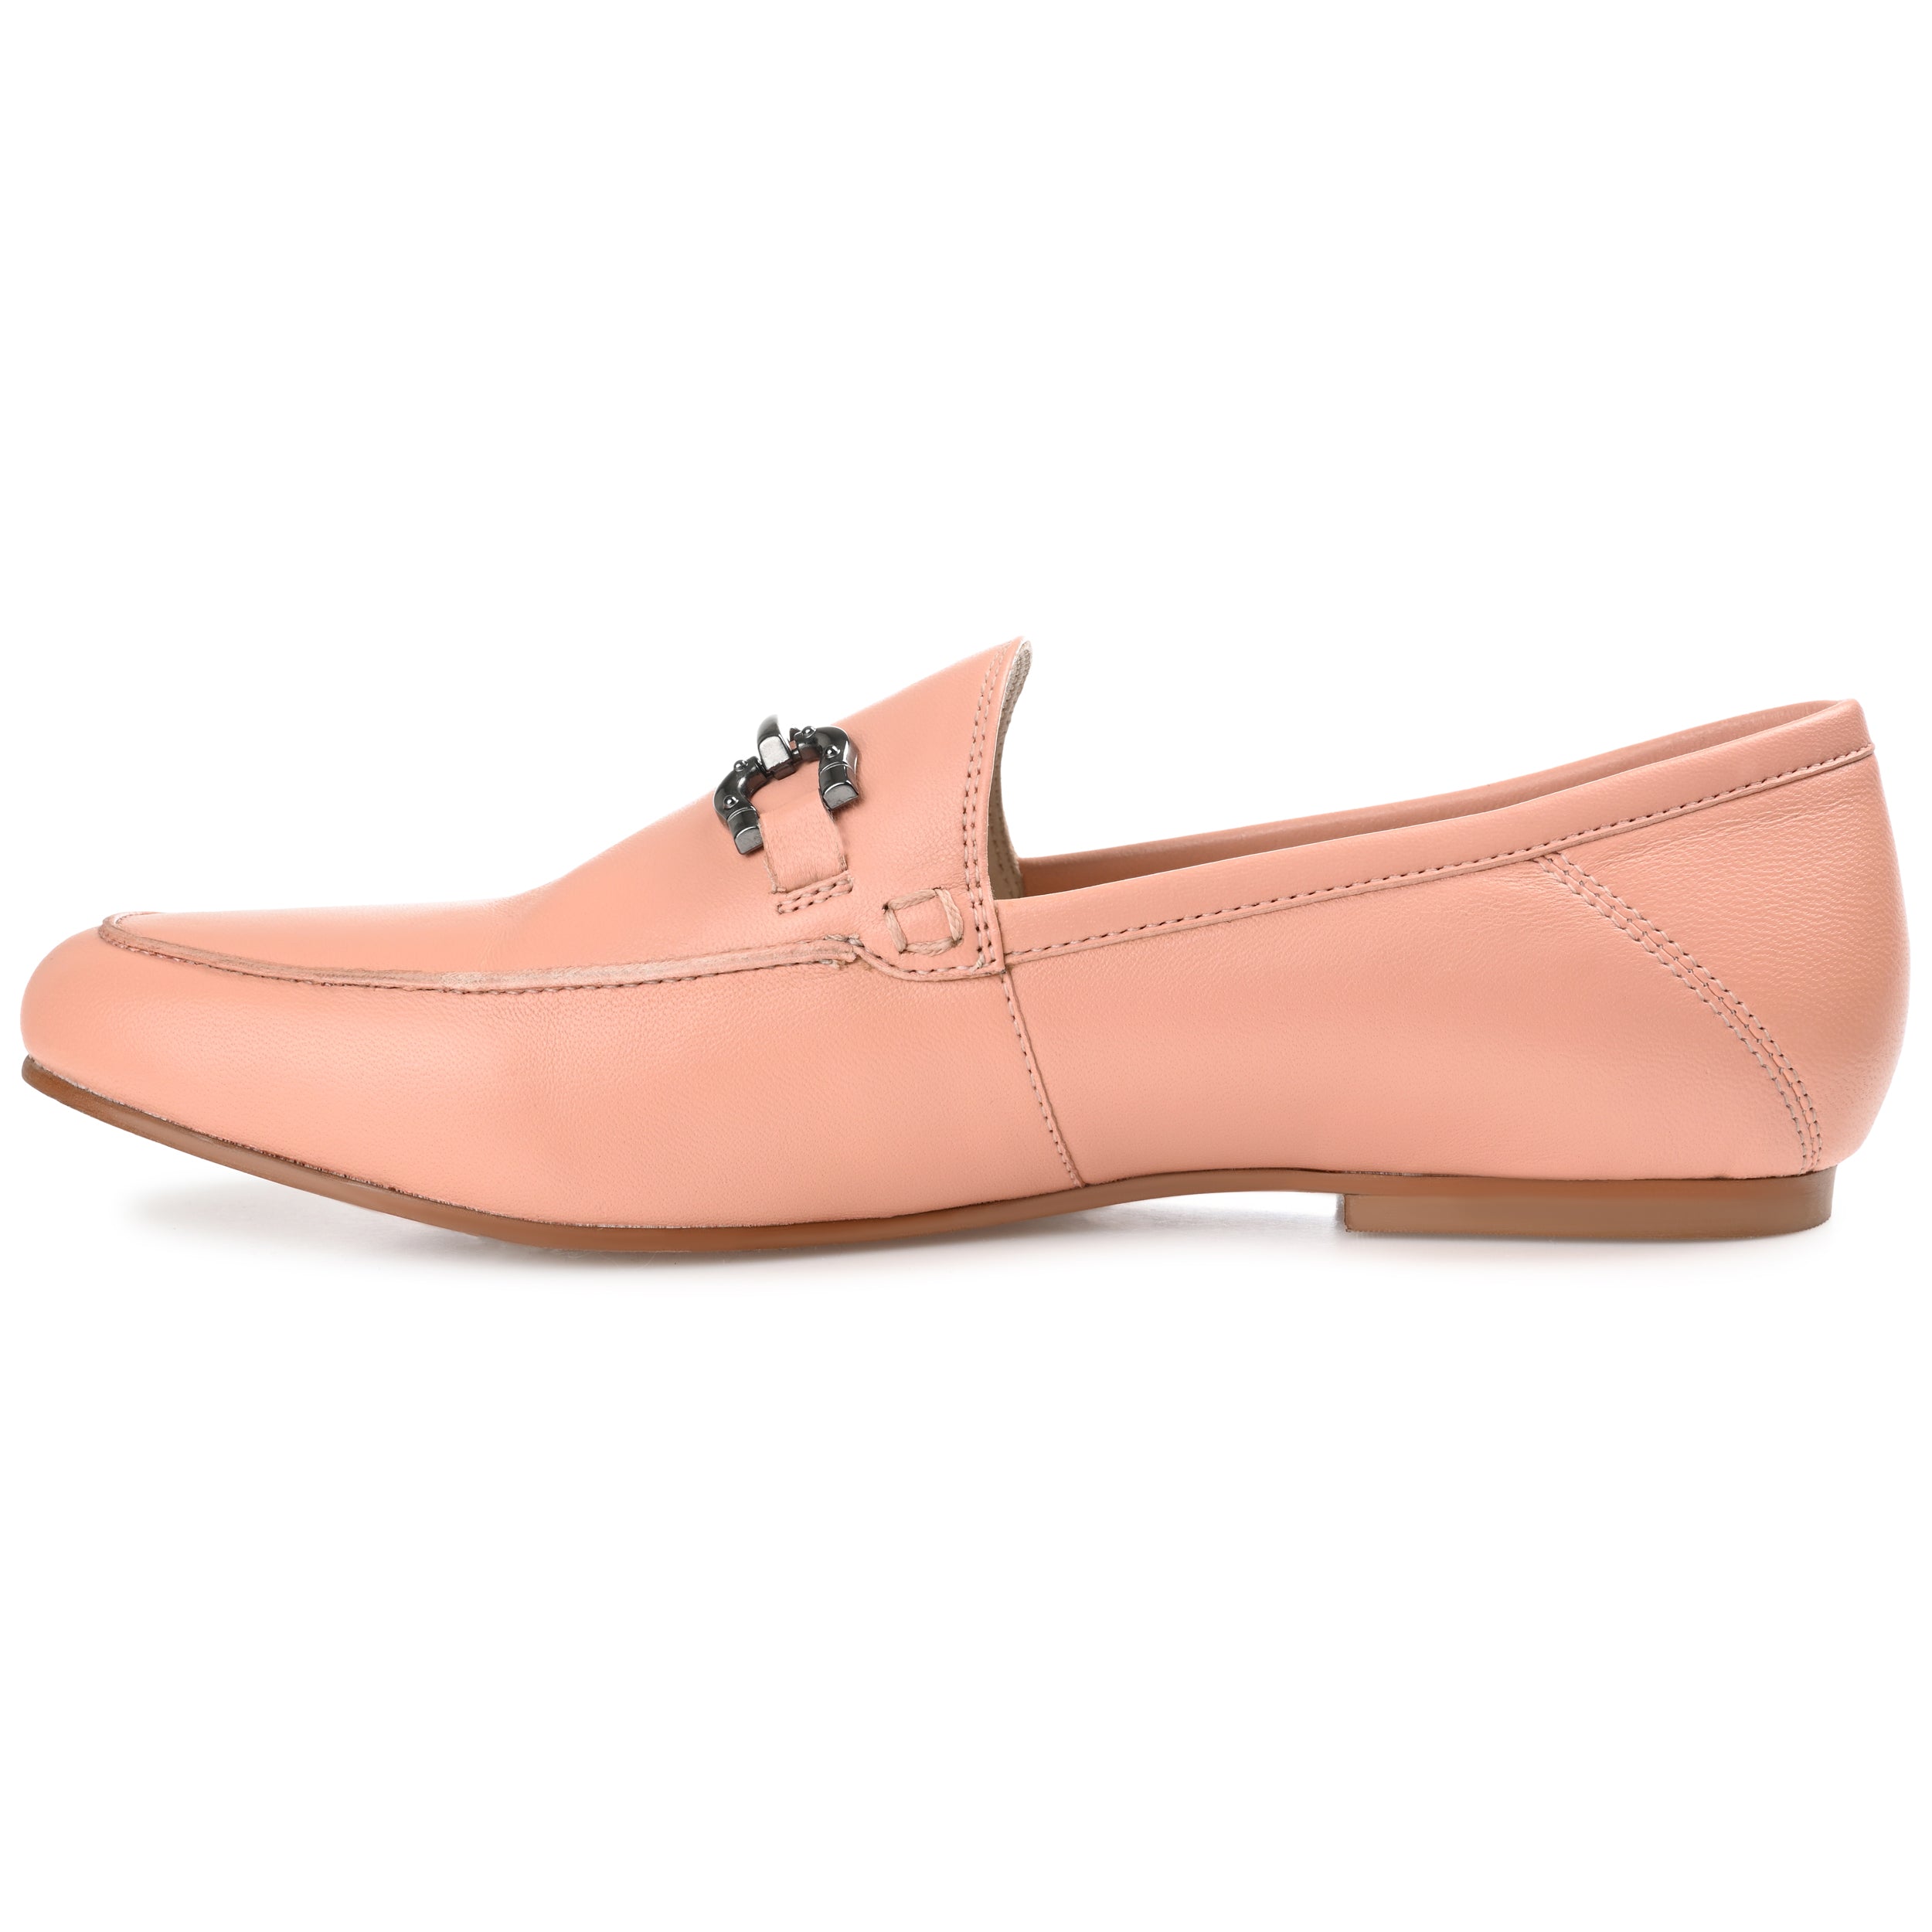 GIIA LOAFER FLAT IN LEATHER